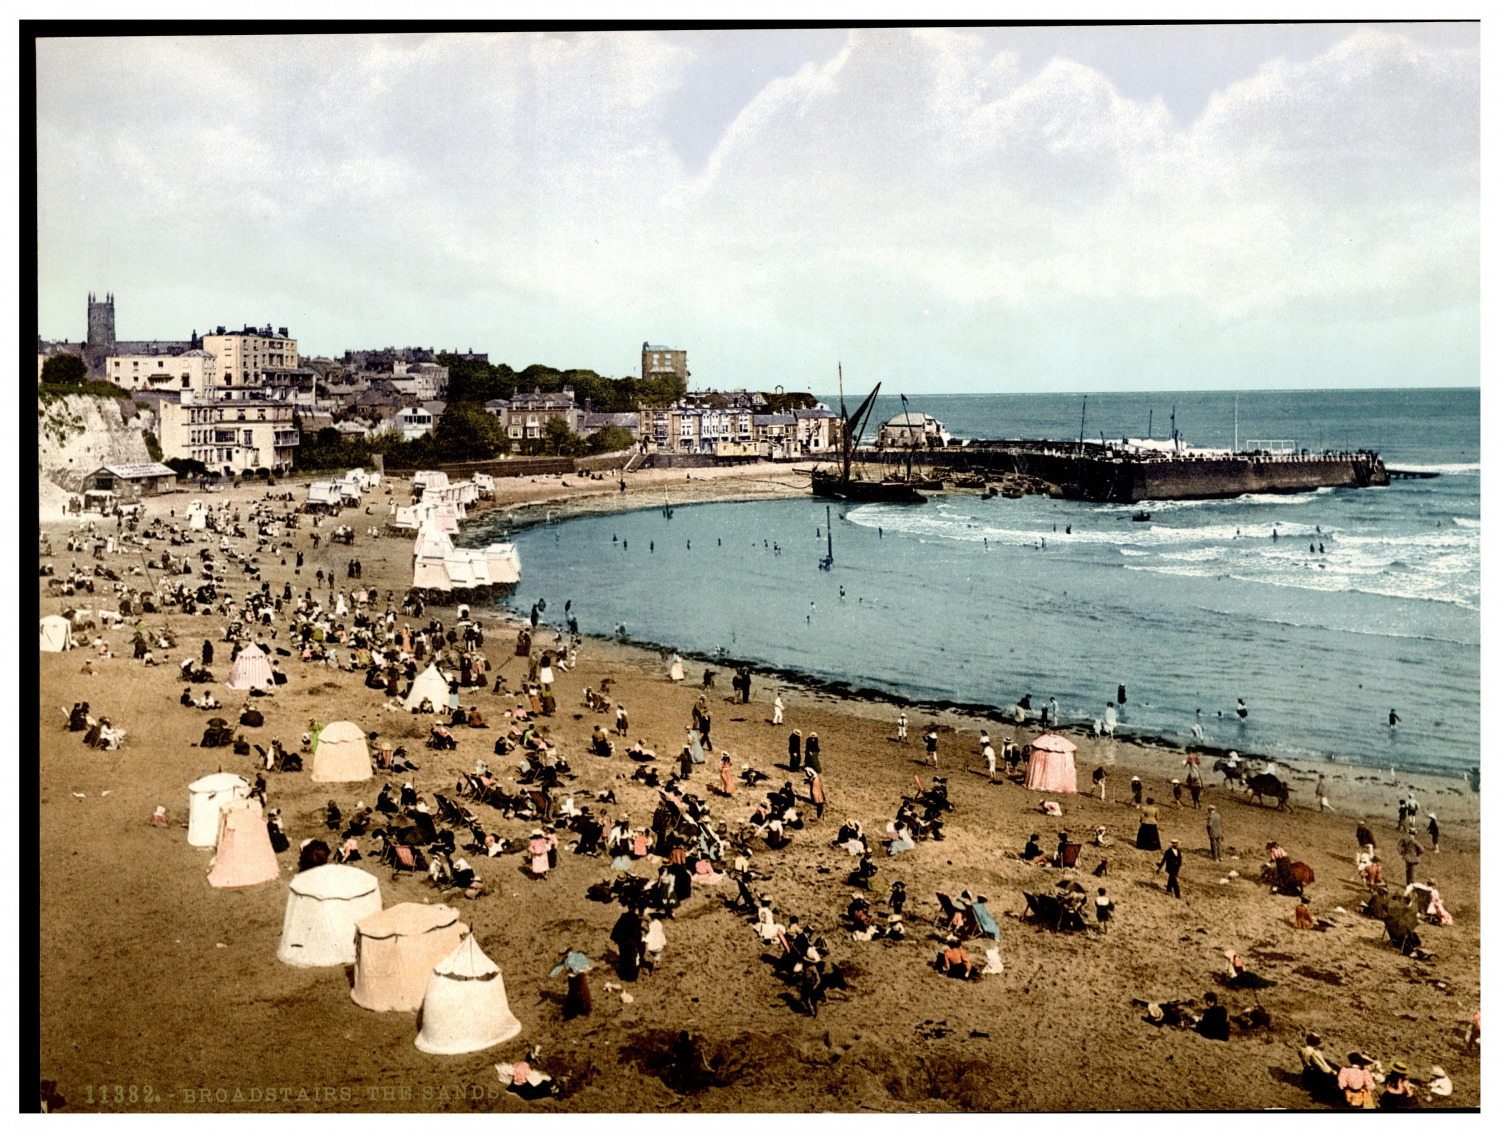 England. Broadstairs. The Sands. Vintage photochrome by P.Z, photochrome Zurich